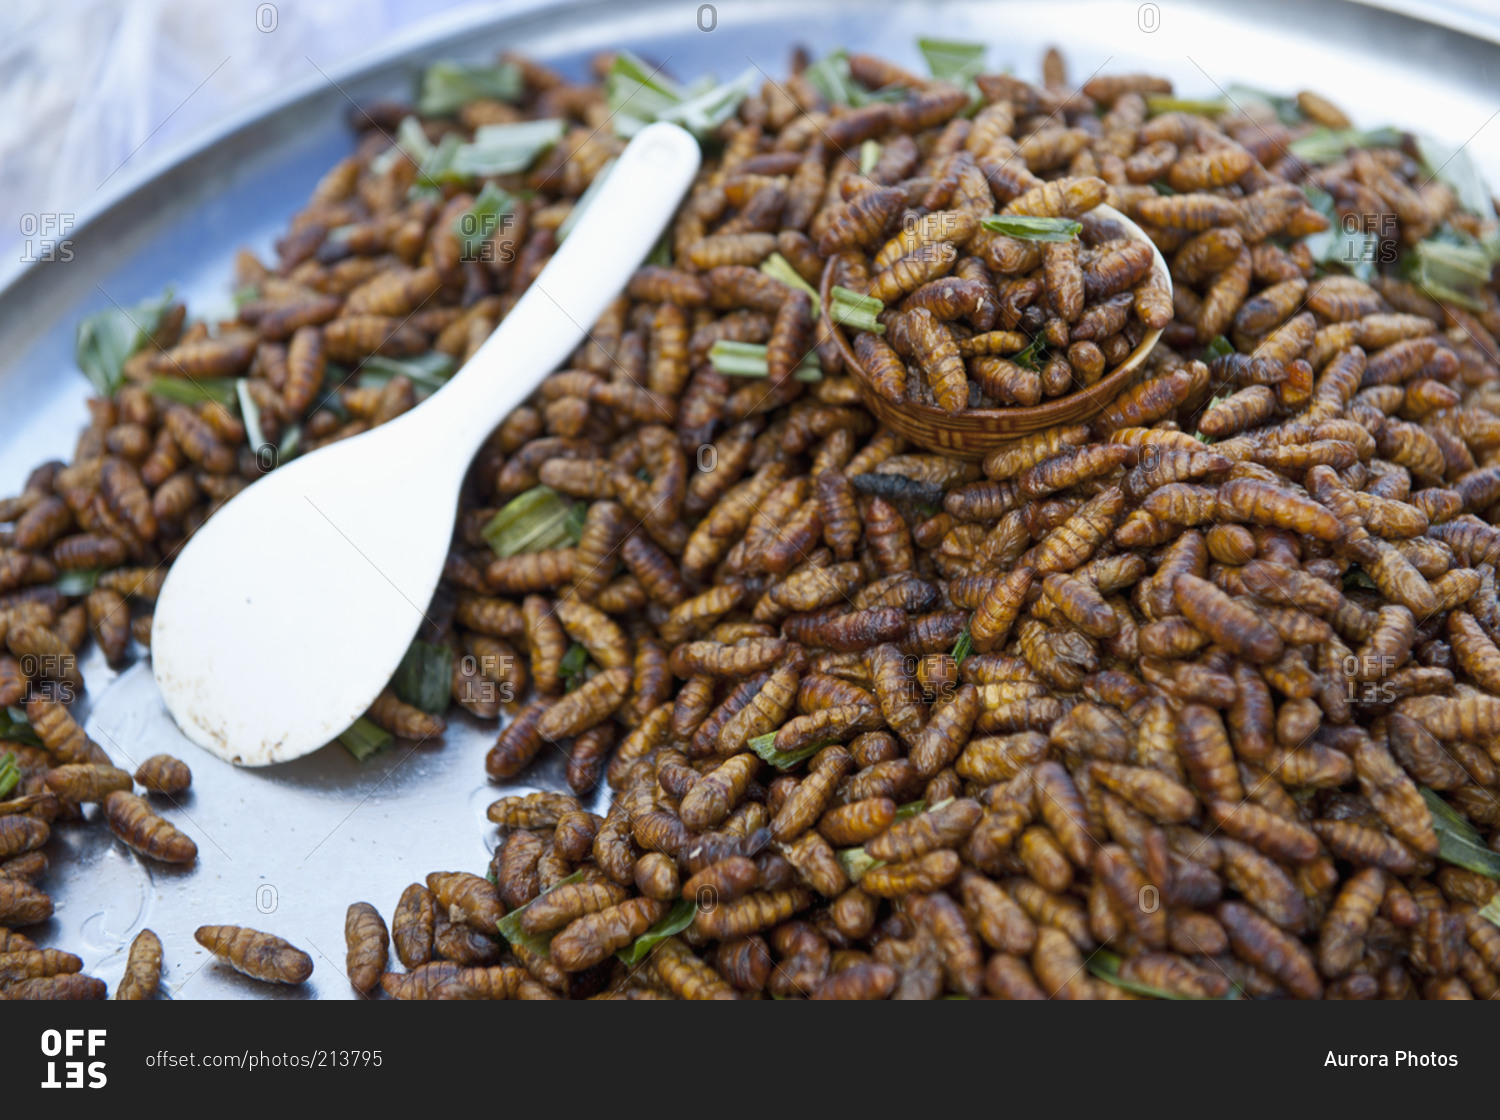 Bamboo worms is a local gourmet food in Thailand